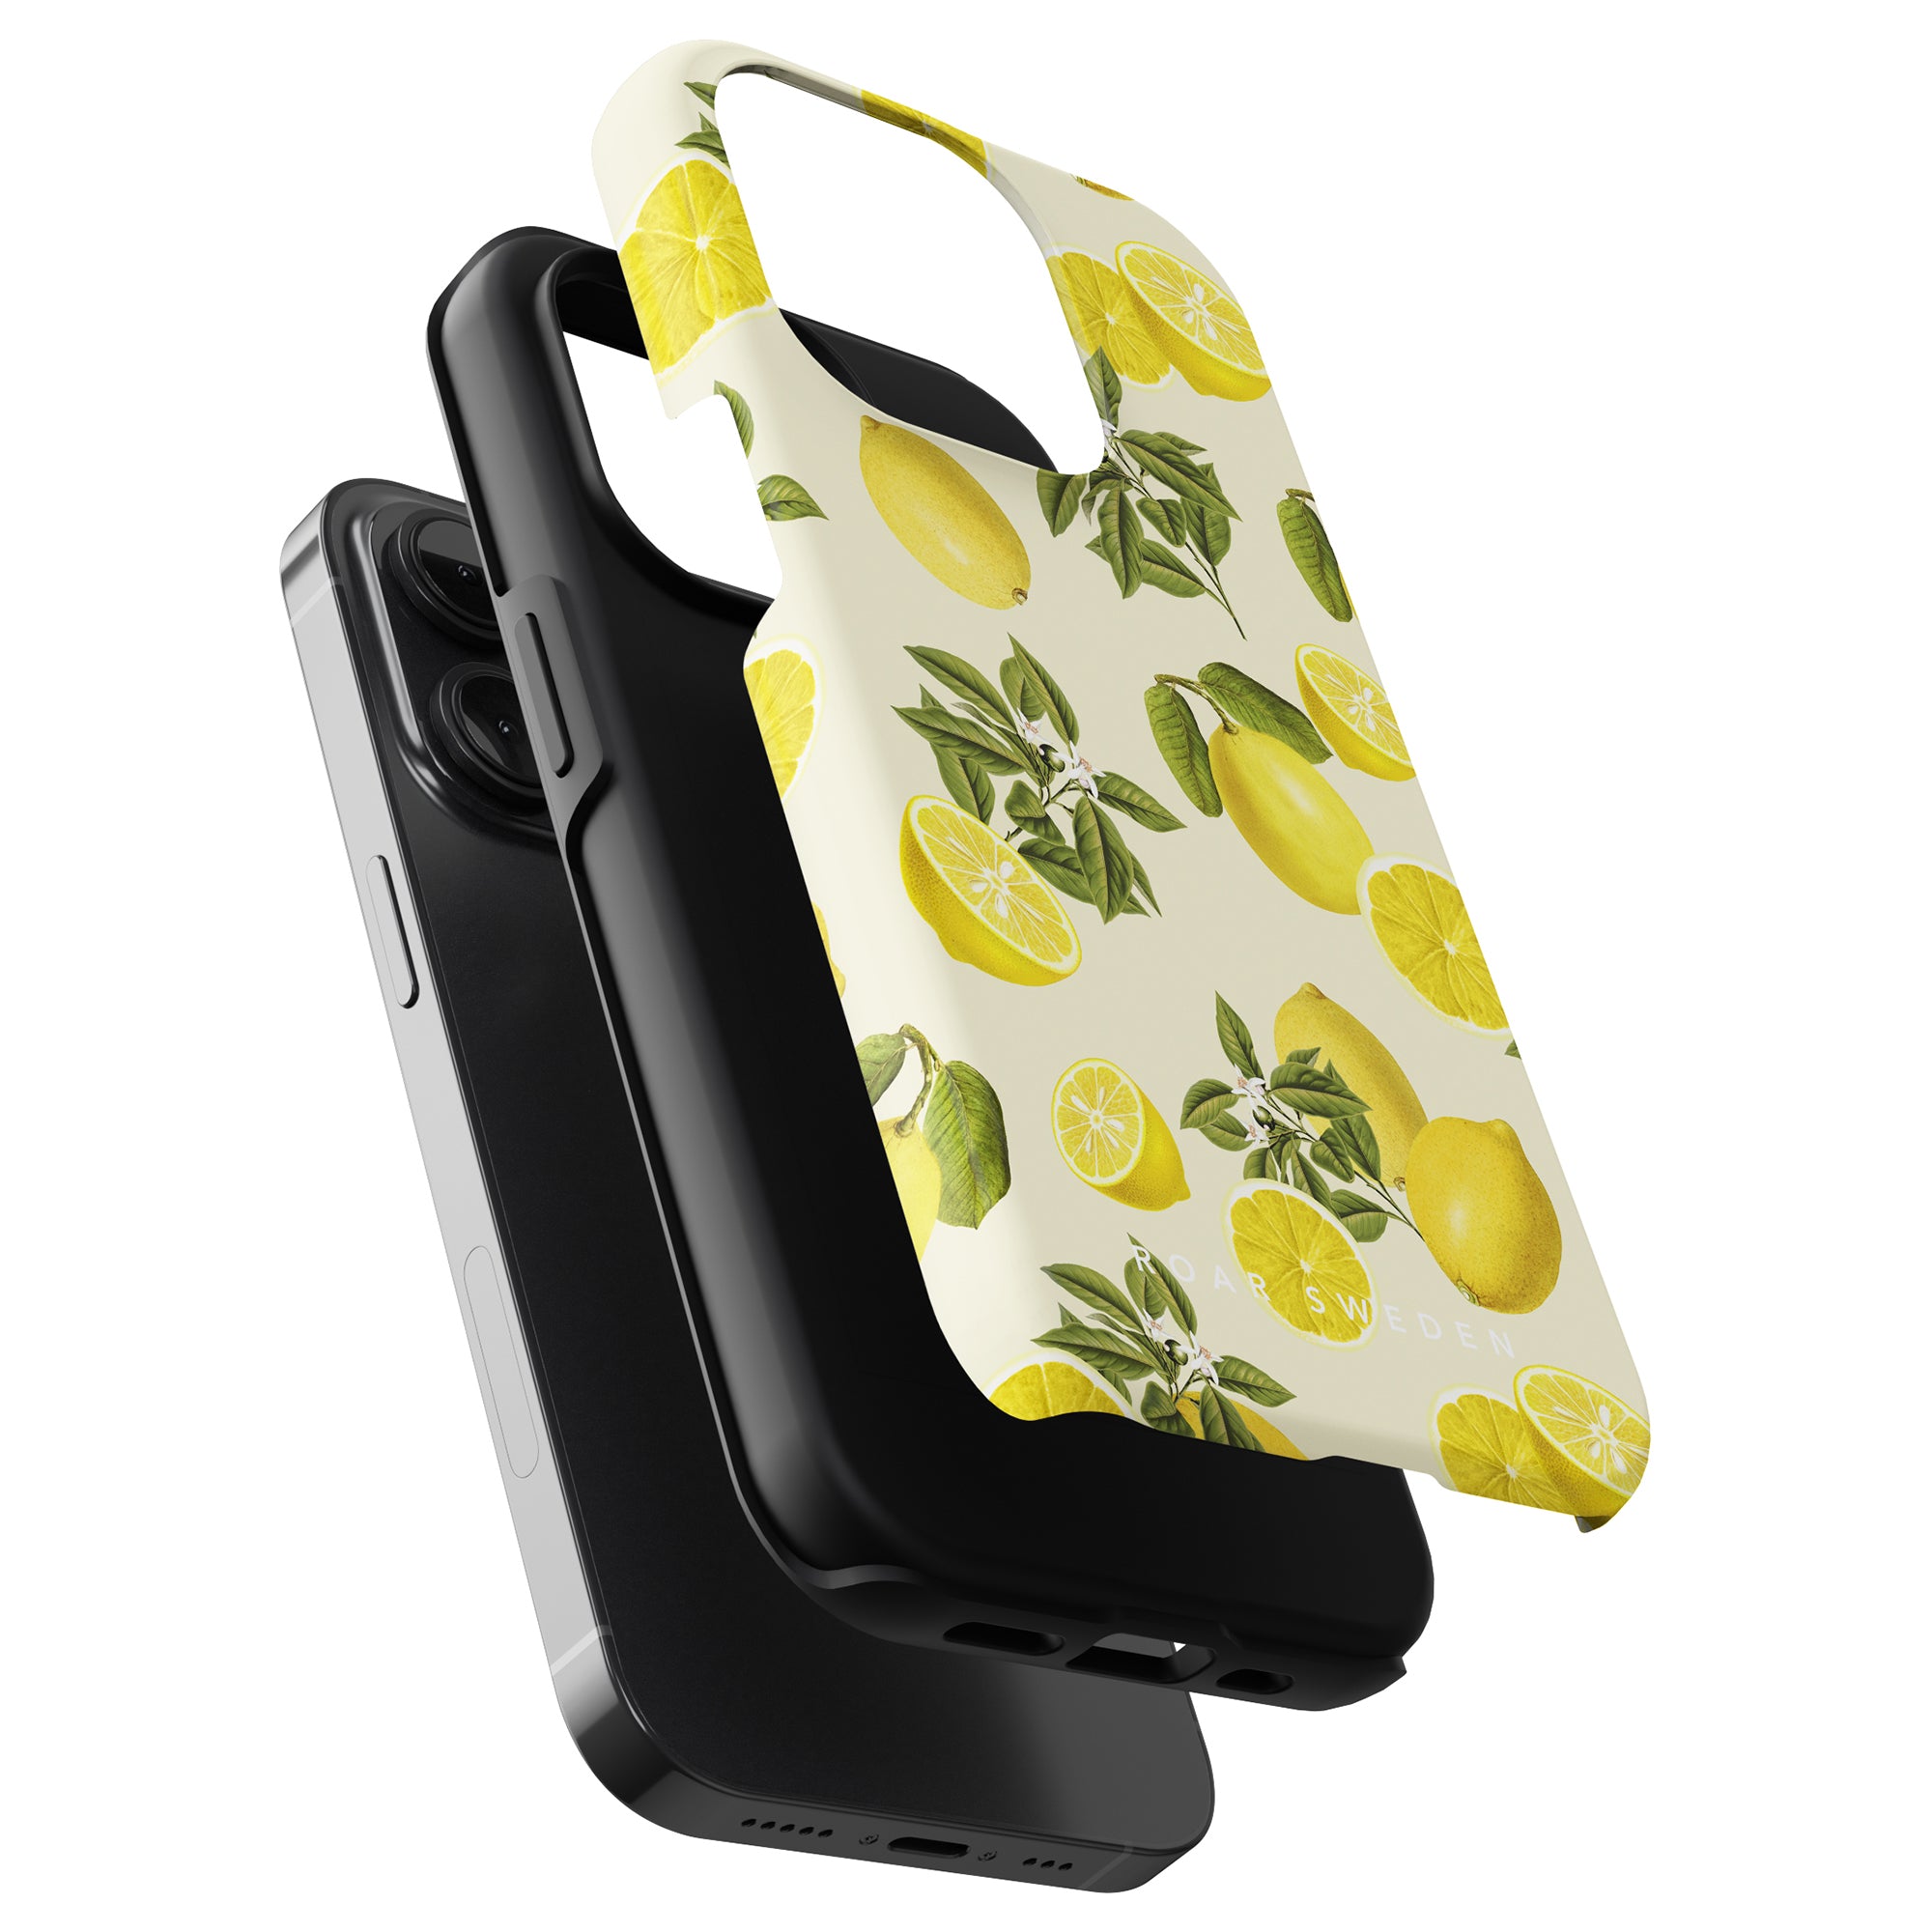 A Limon - Tough Case smartphone with a black wireless charging dock.